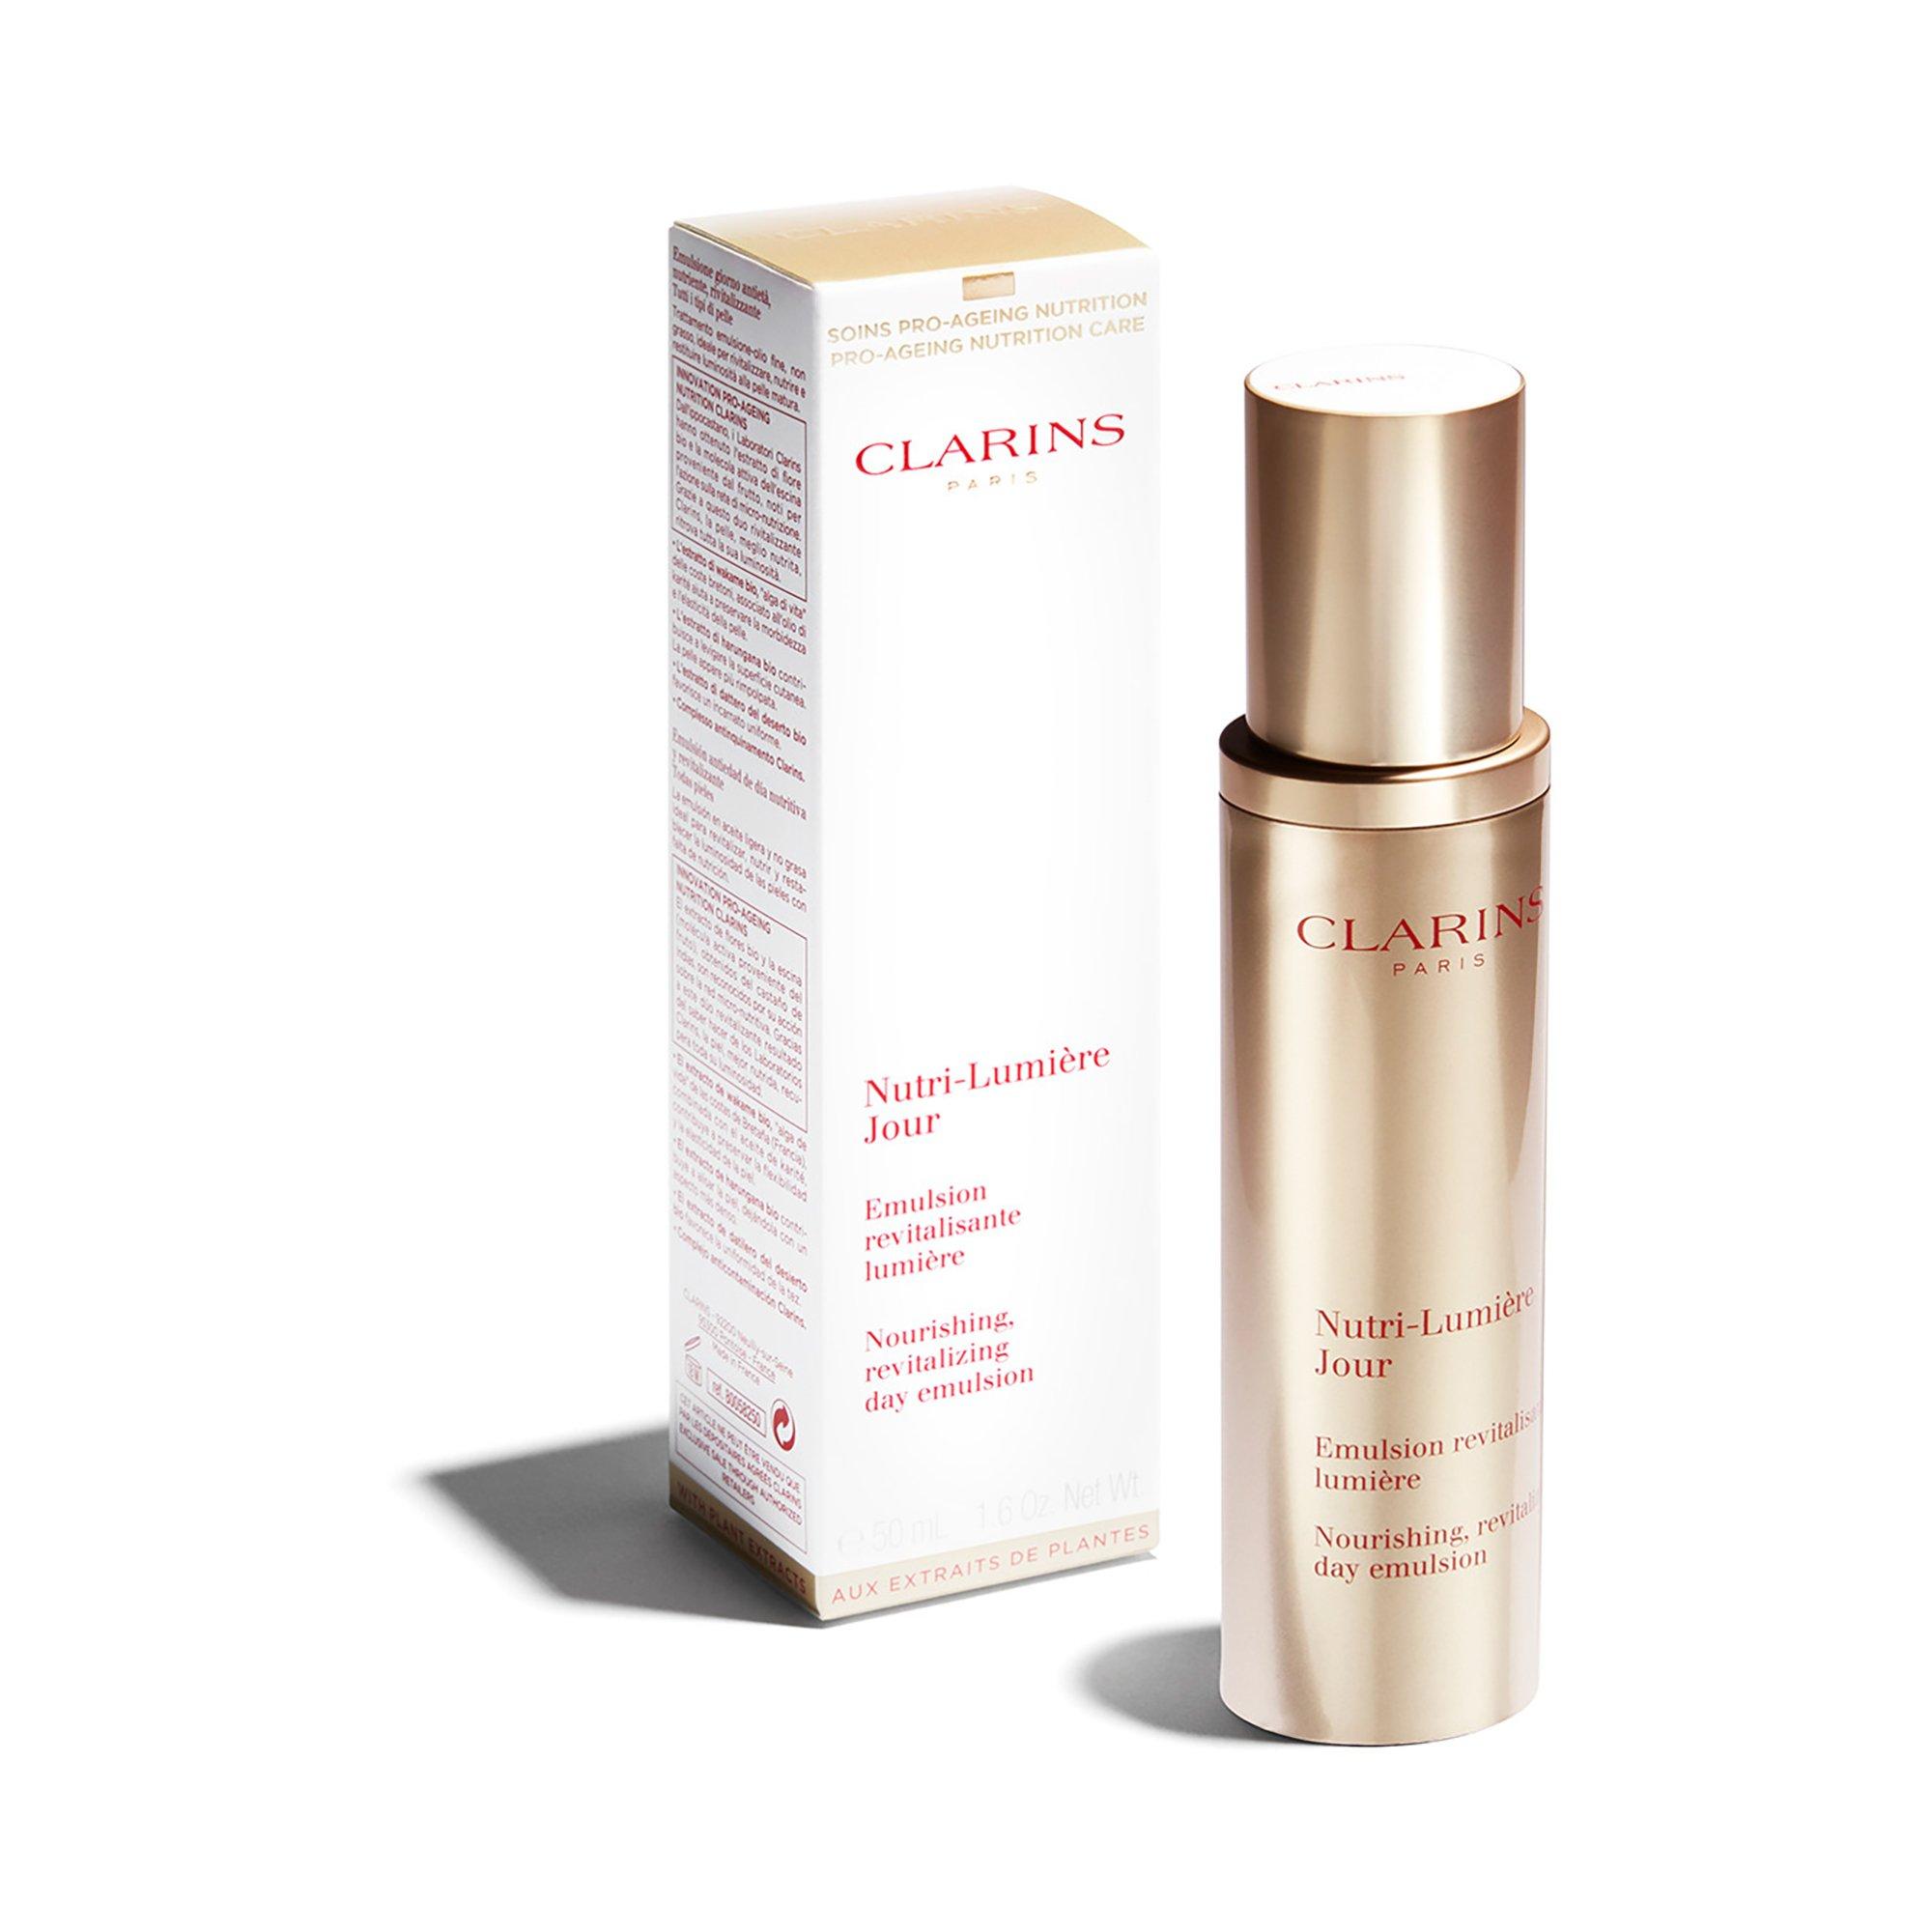 Image of CLARINS Nutri Lumiere Emulsion Jour - 50g